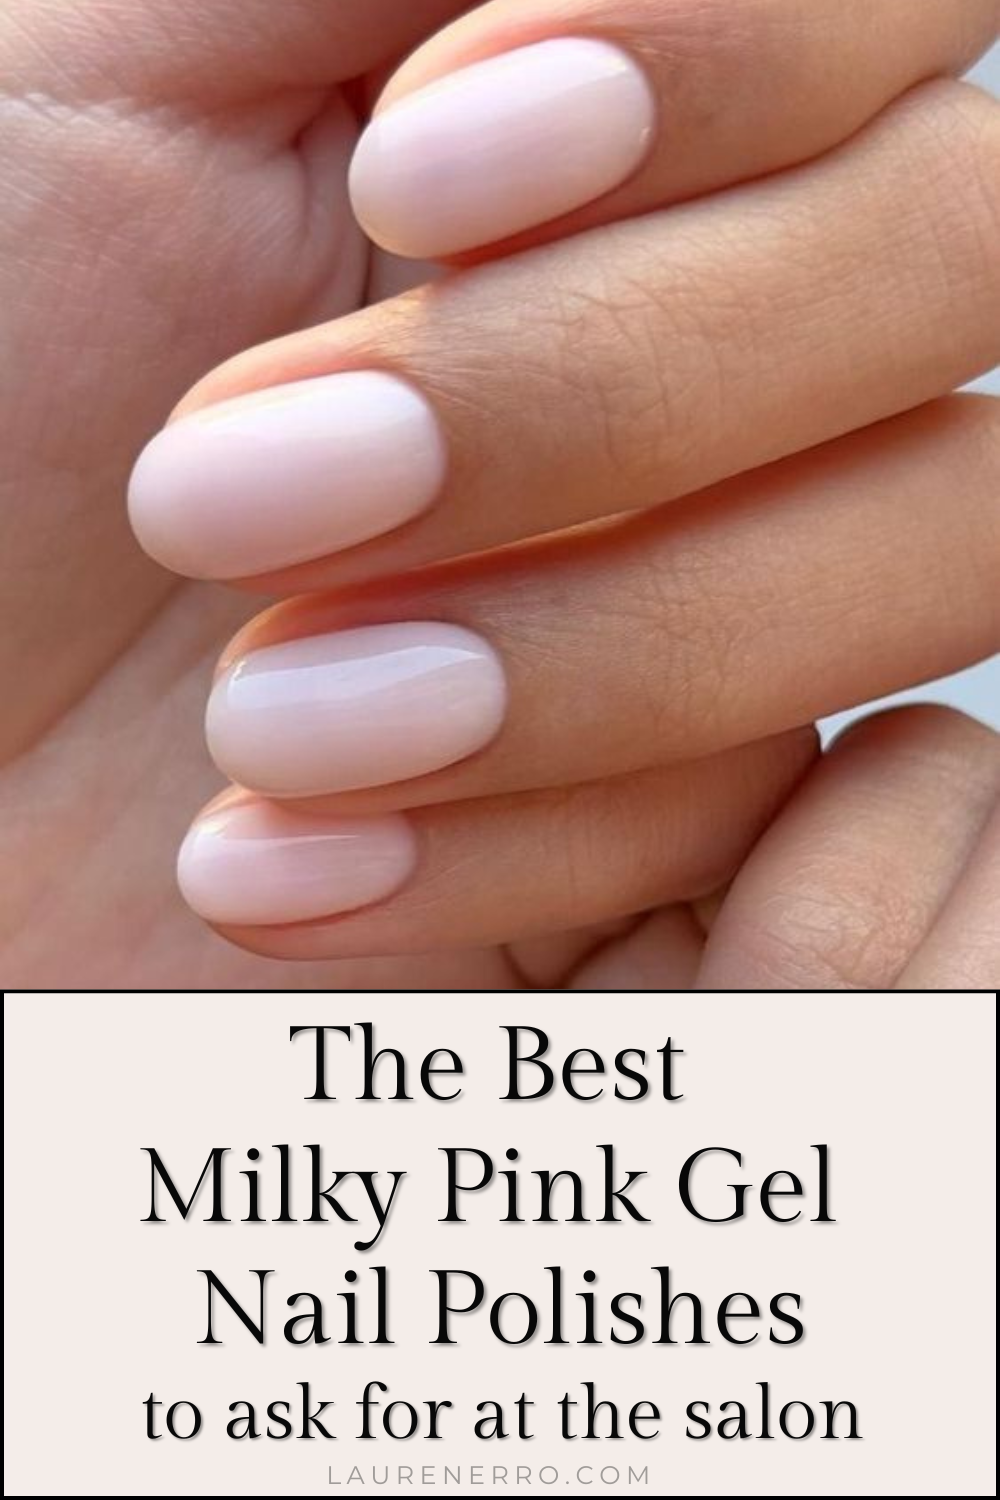 The Best Milky Pink Gel Polish Colors at the Nail Salon